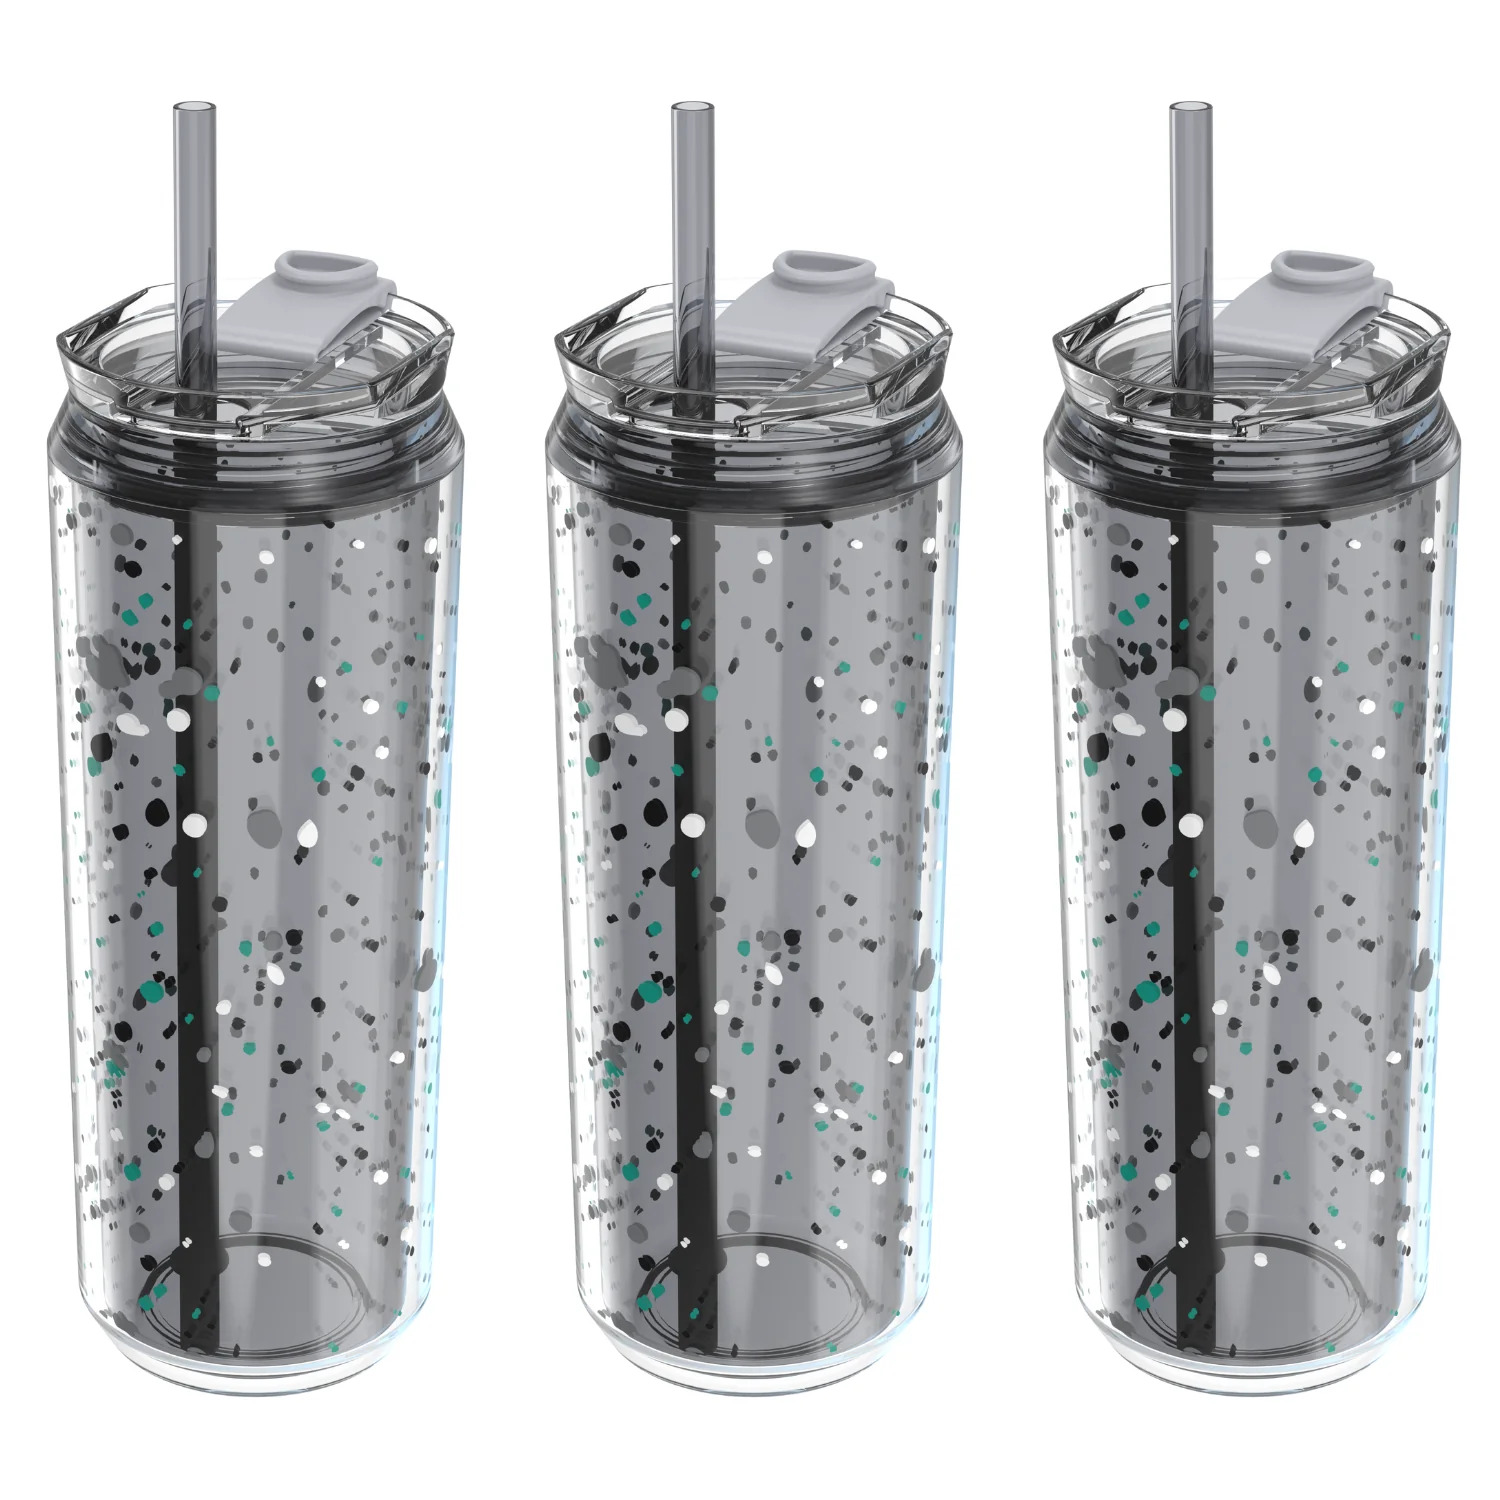 Cool Gear 3-Pack Modern Tumbler with Reusable Straw | Dishwasher Safe, Cup Holder Friendly, Spillproof, Double-Wall Insulated Travel Tumbler | Printed Splatter Pack - image 1 of 2